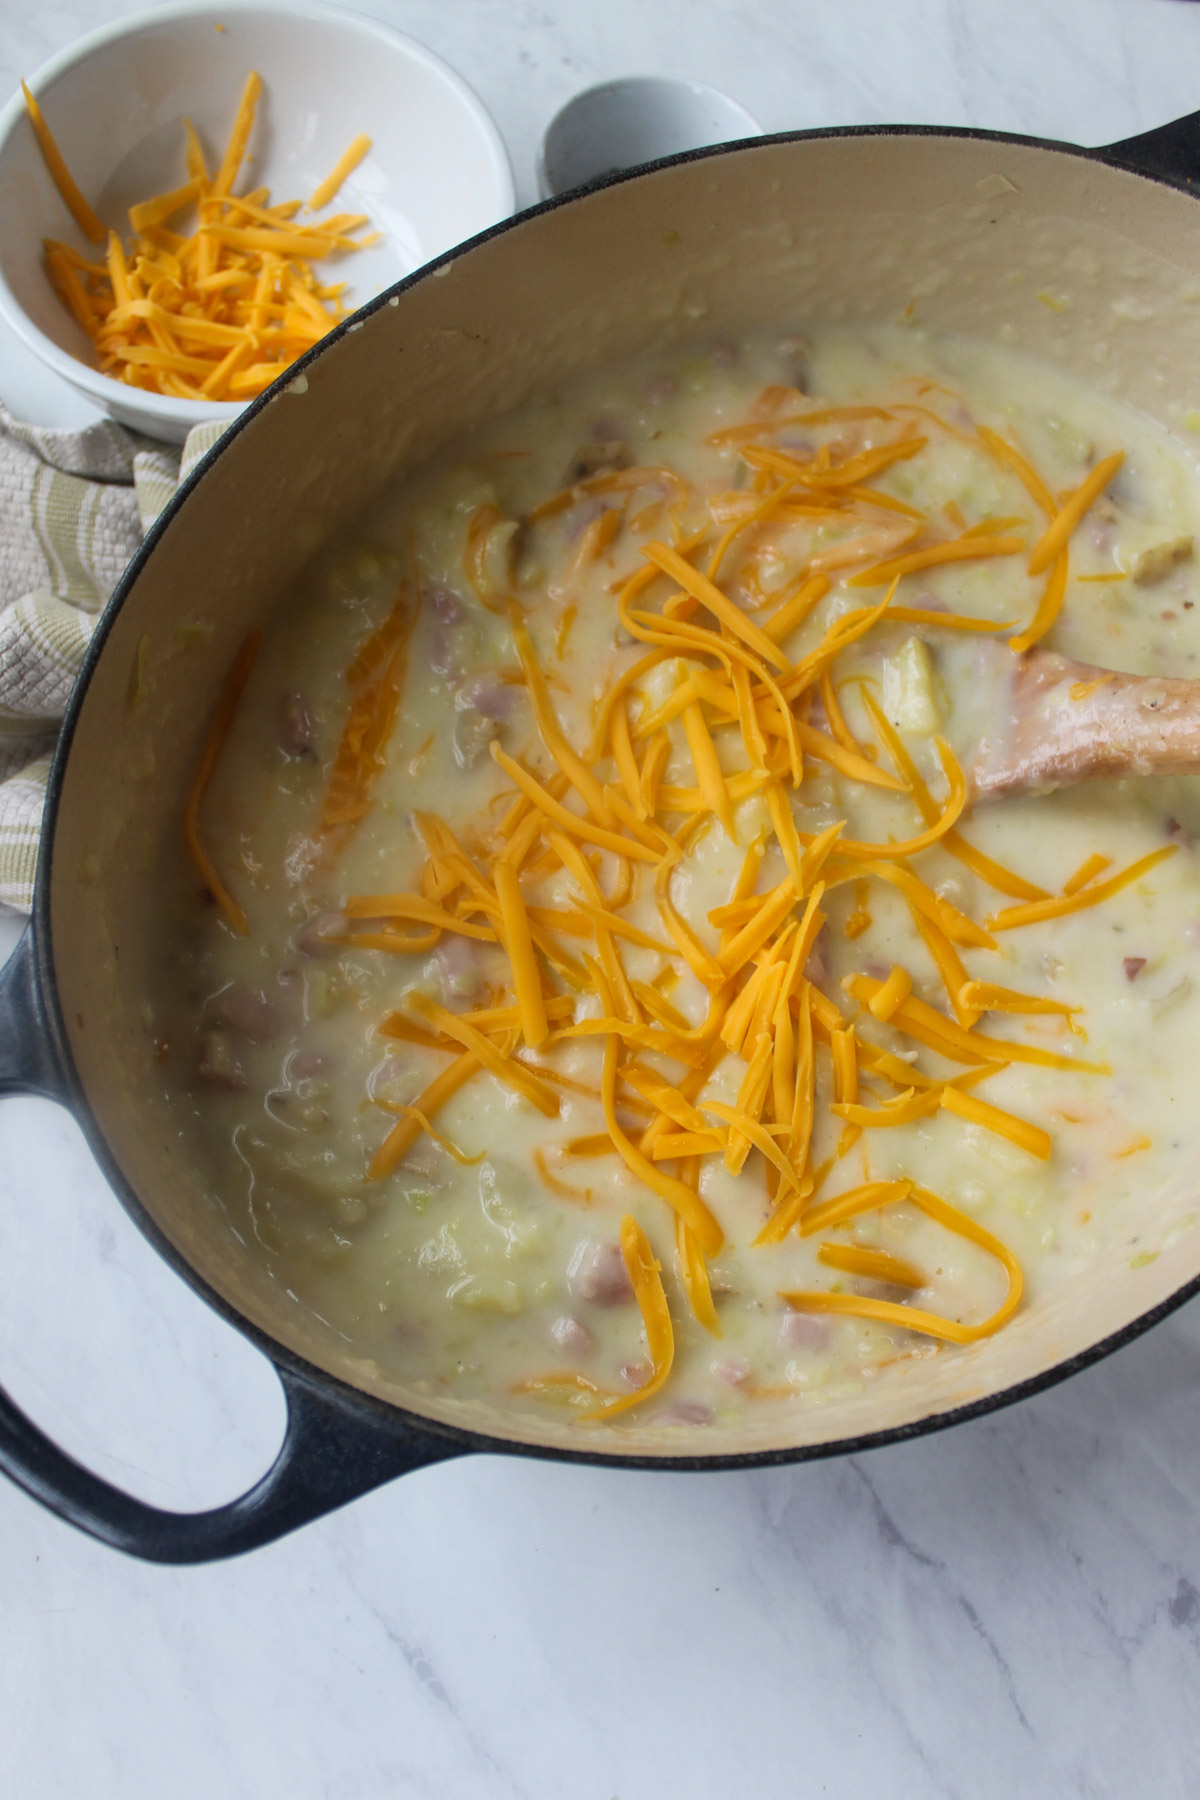 Adding shredded cheddar cheese to the potato ham soup.